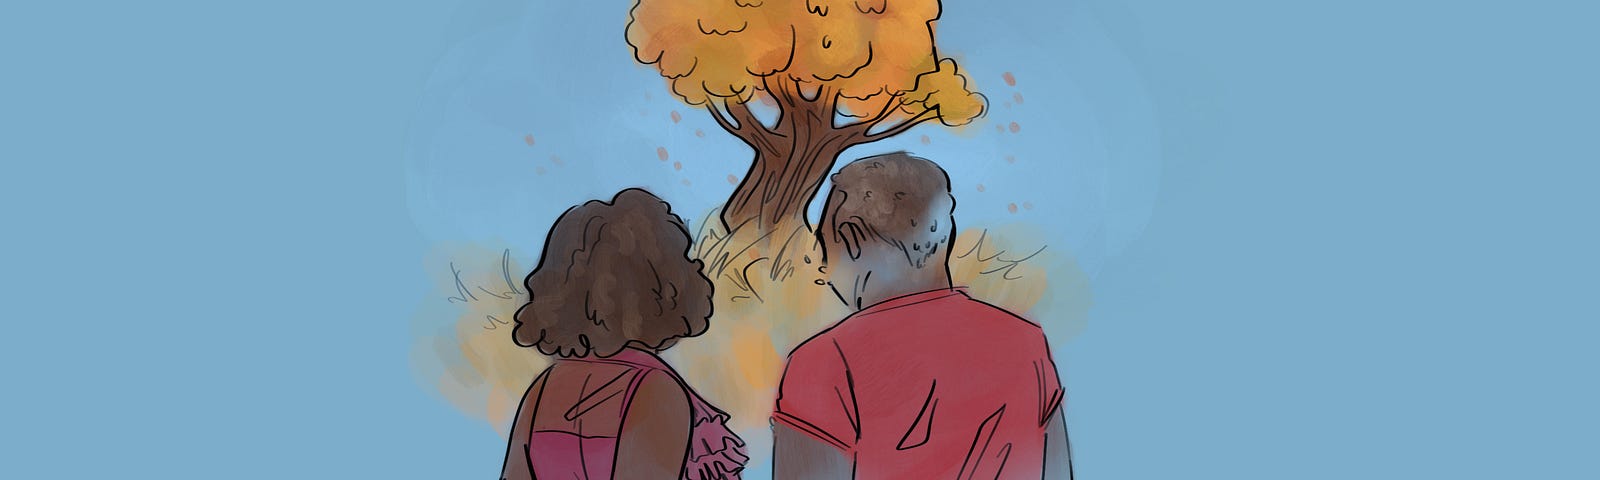 An illustration of two people holding hands in front of a tree.